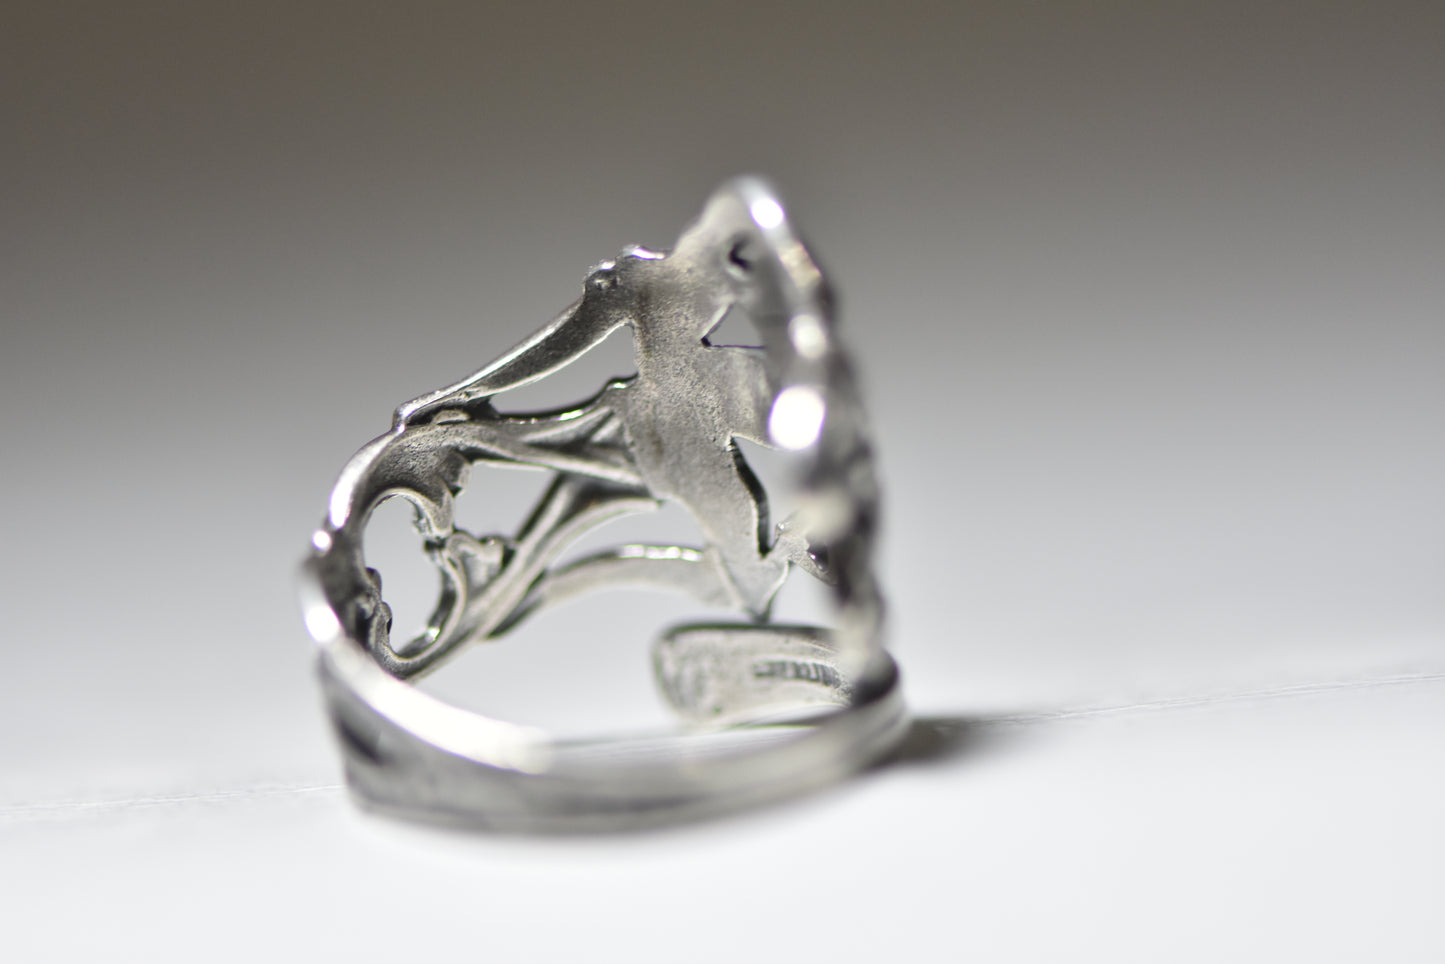 horse ring Lady Godiva spoon band goddess cowgirl sterling silver women